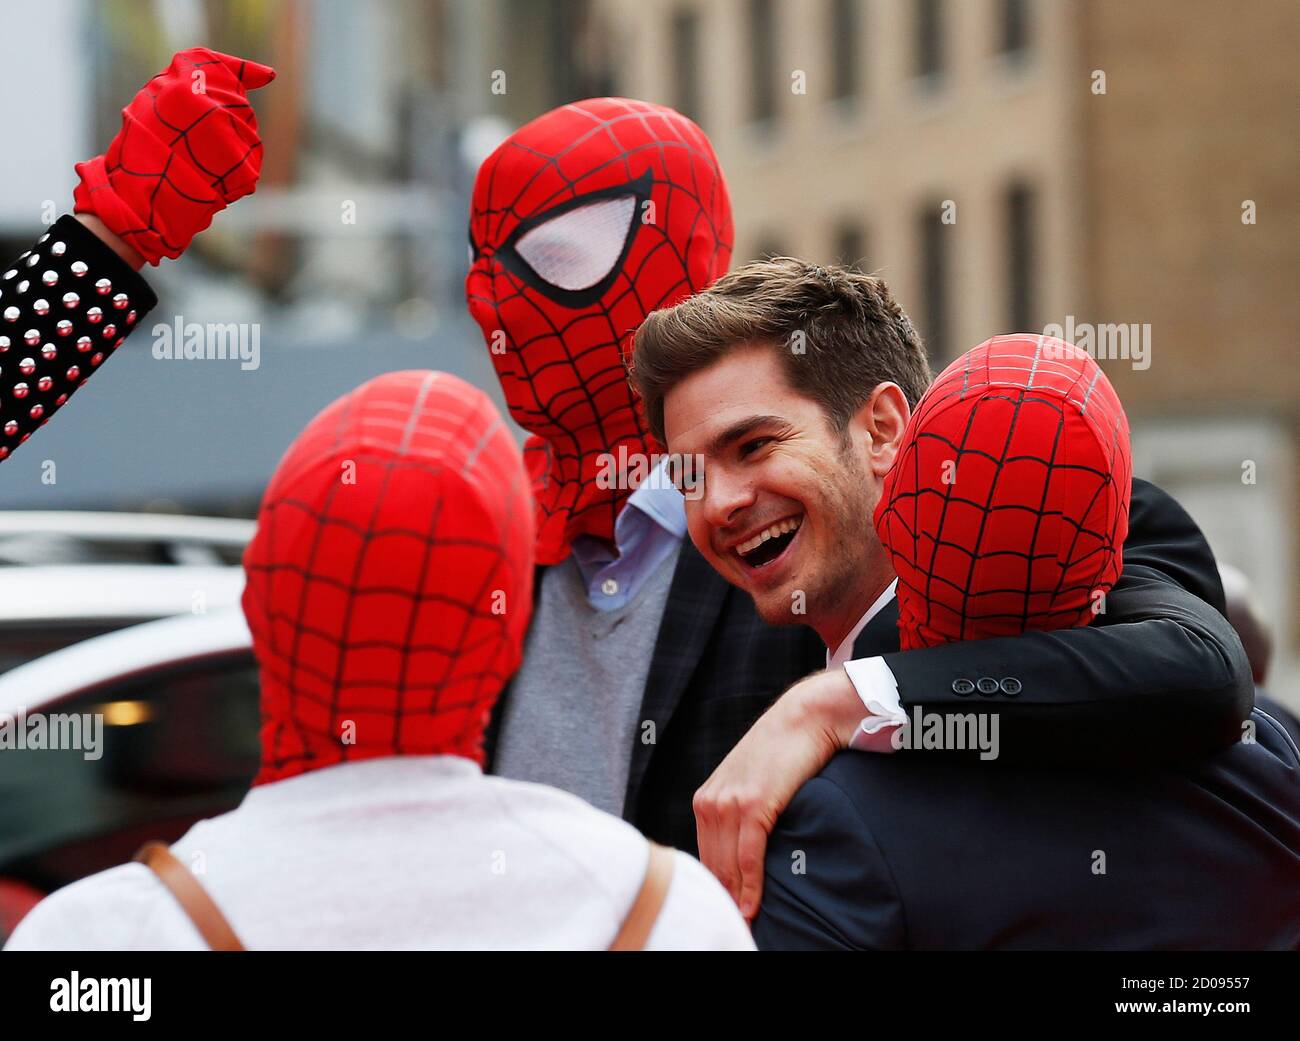 Actor Andrew Garfield messes around with friends dressed in Spider Man  masks at the world premiere of The Amazing Spiderman 2 in central London,  April 10, 2014. REUTERS/Olivia Harris (BRITAIN - Tags: